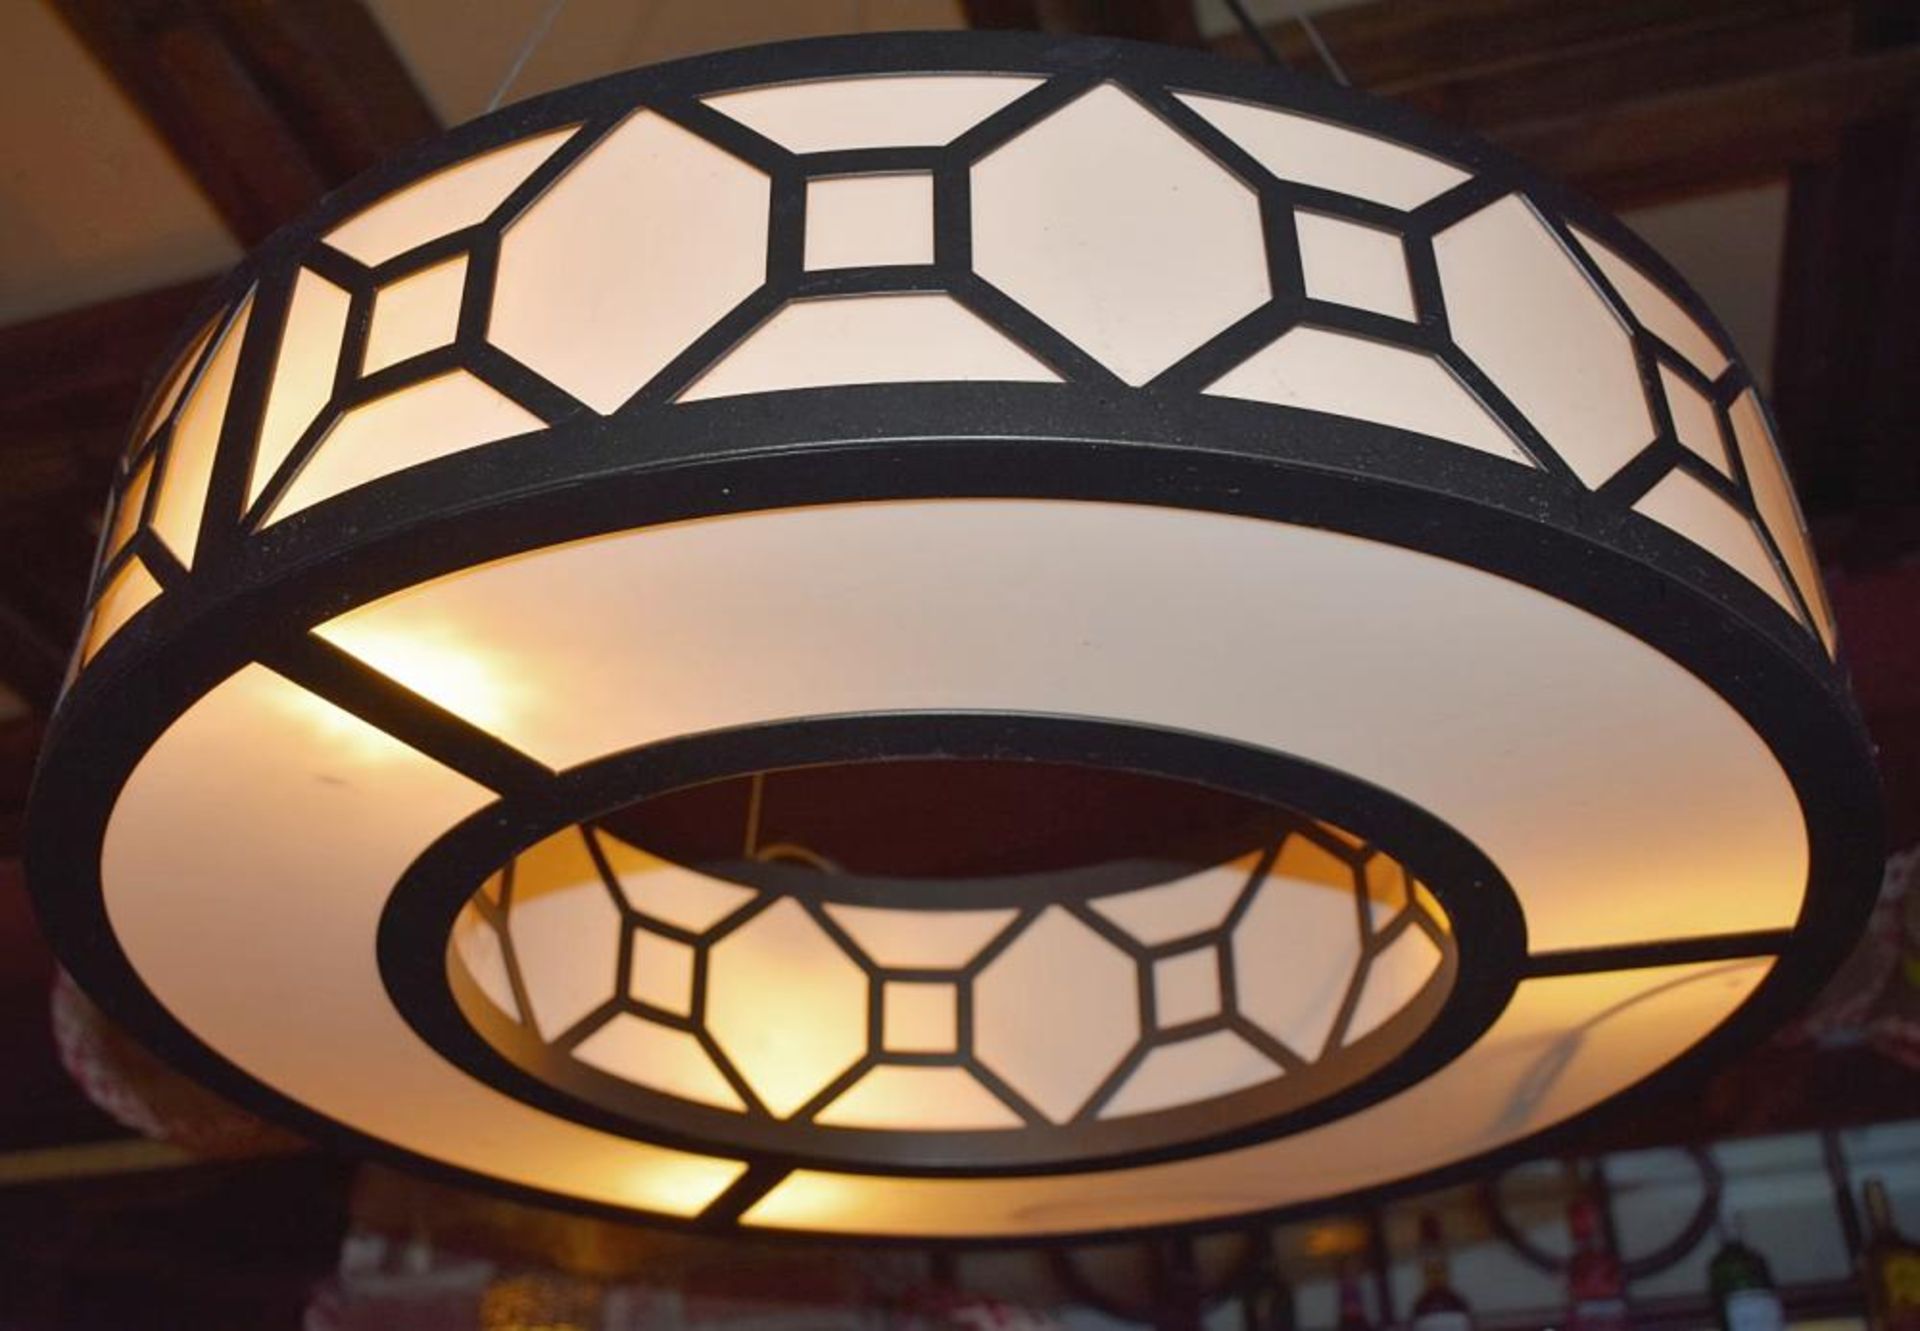 1 x Large Round Suspended Commercial Ceiling Light Fitting Featuring A Leaded Glass Style Shade - Di